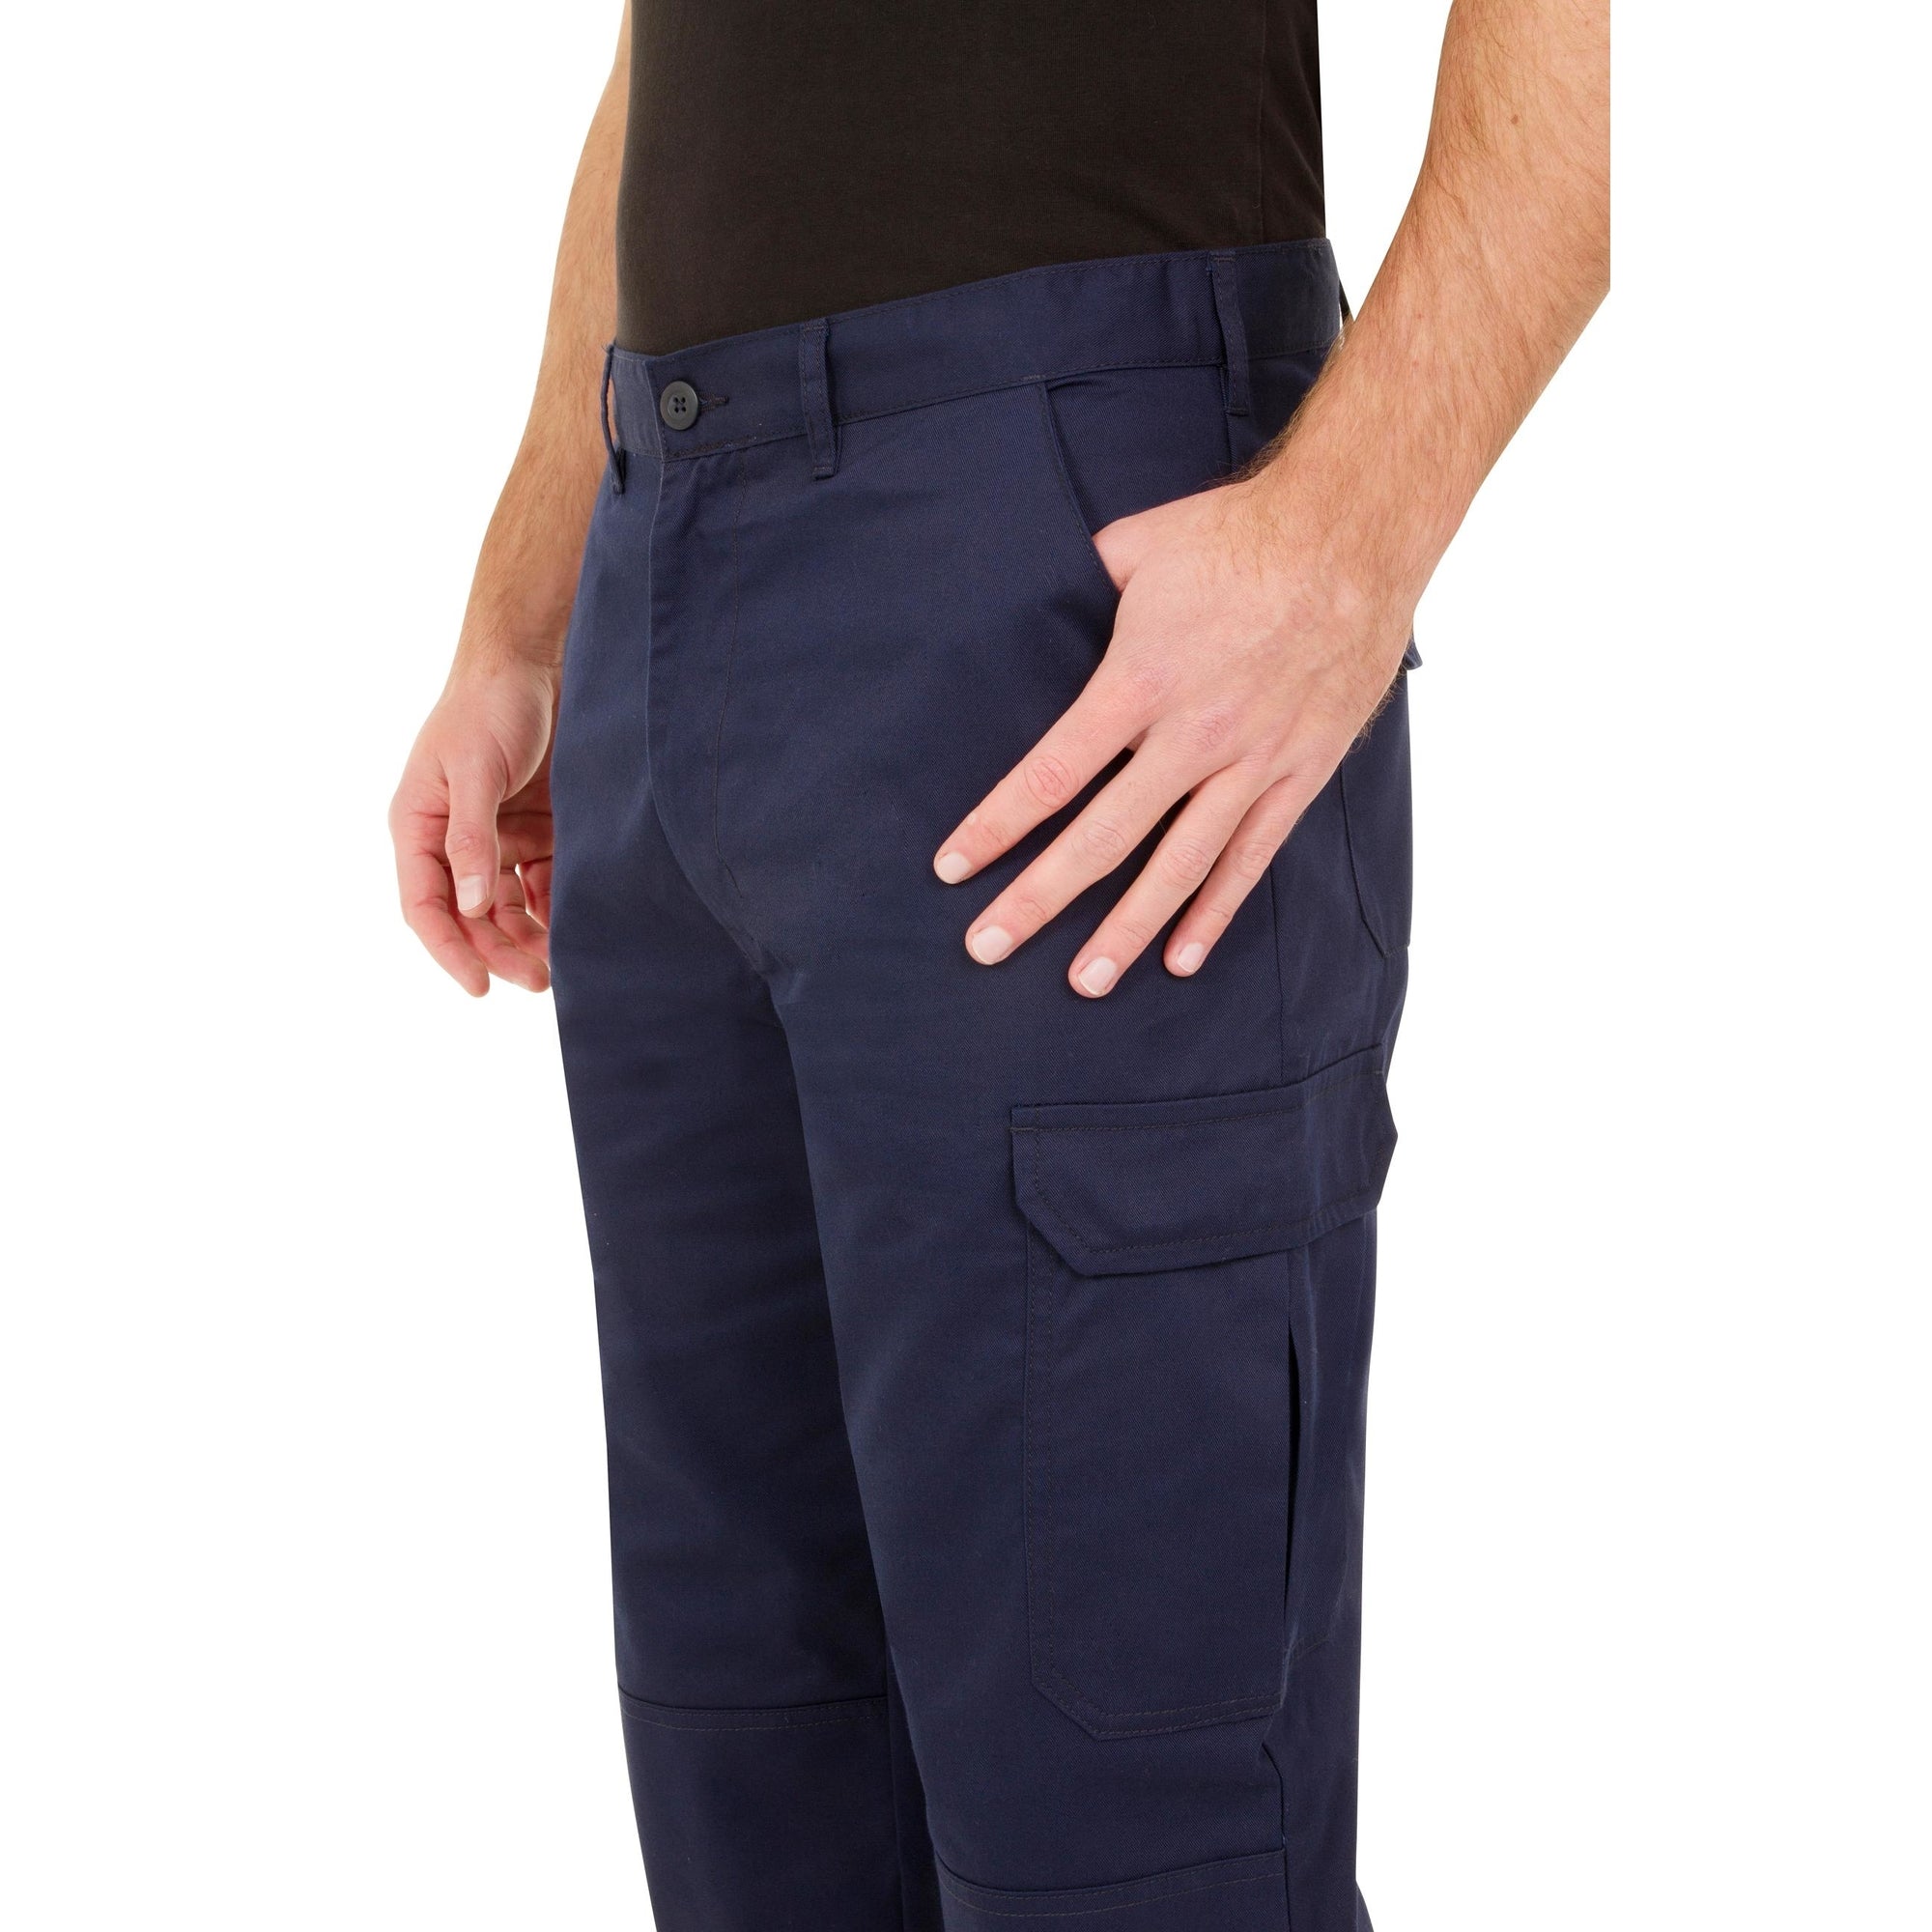 ᐉ PRIMO NAVY Work trousers 409  Workwear trousers at Top Prices   Stensonet